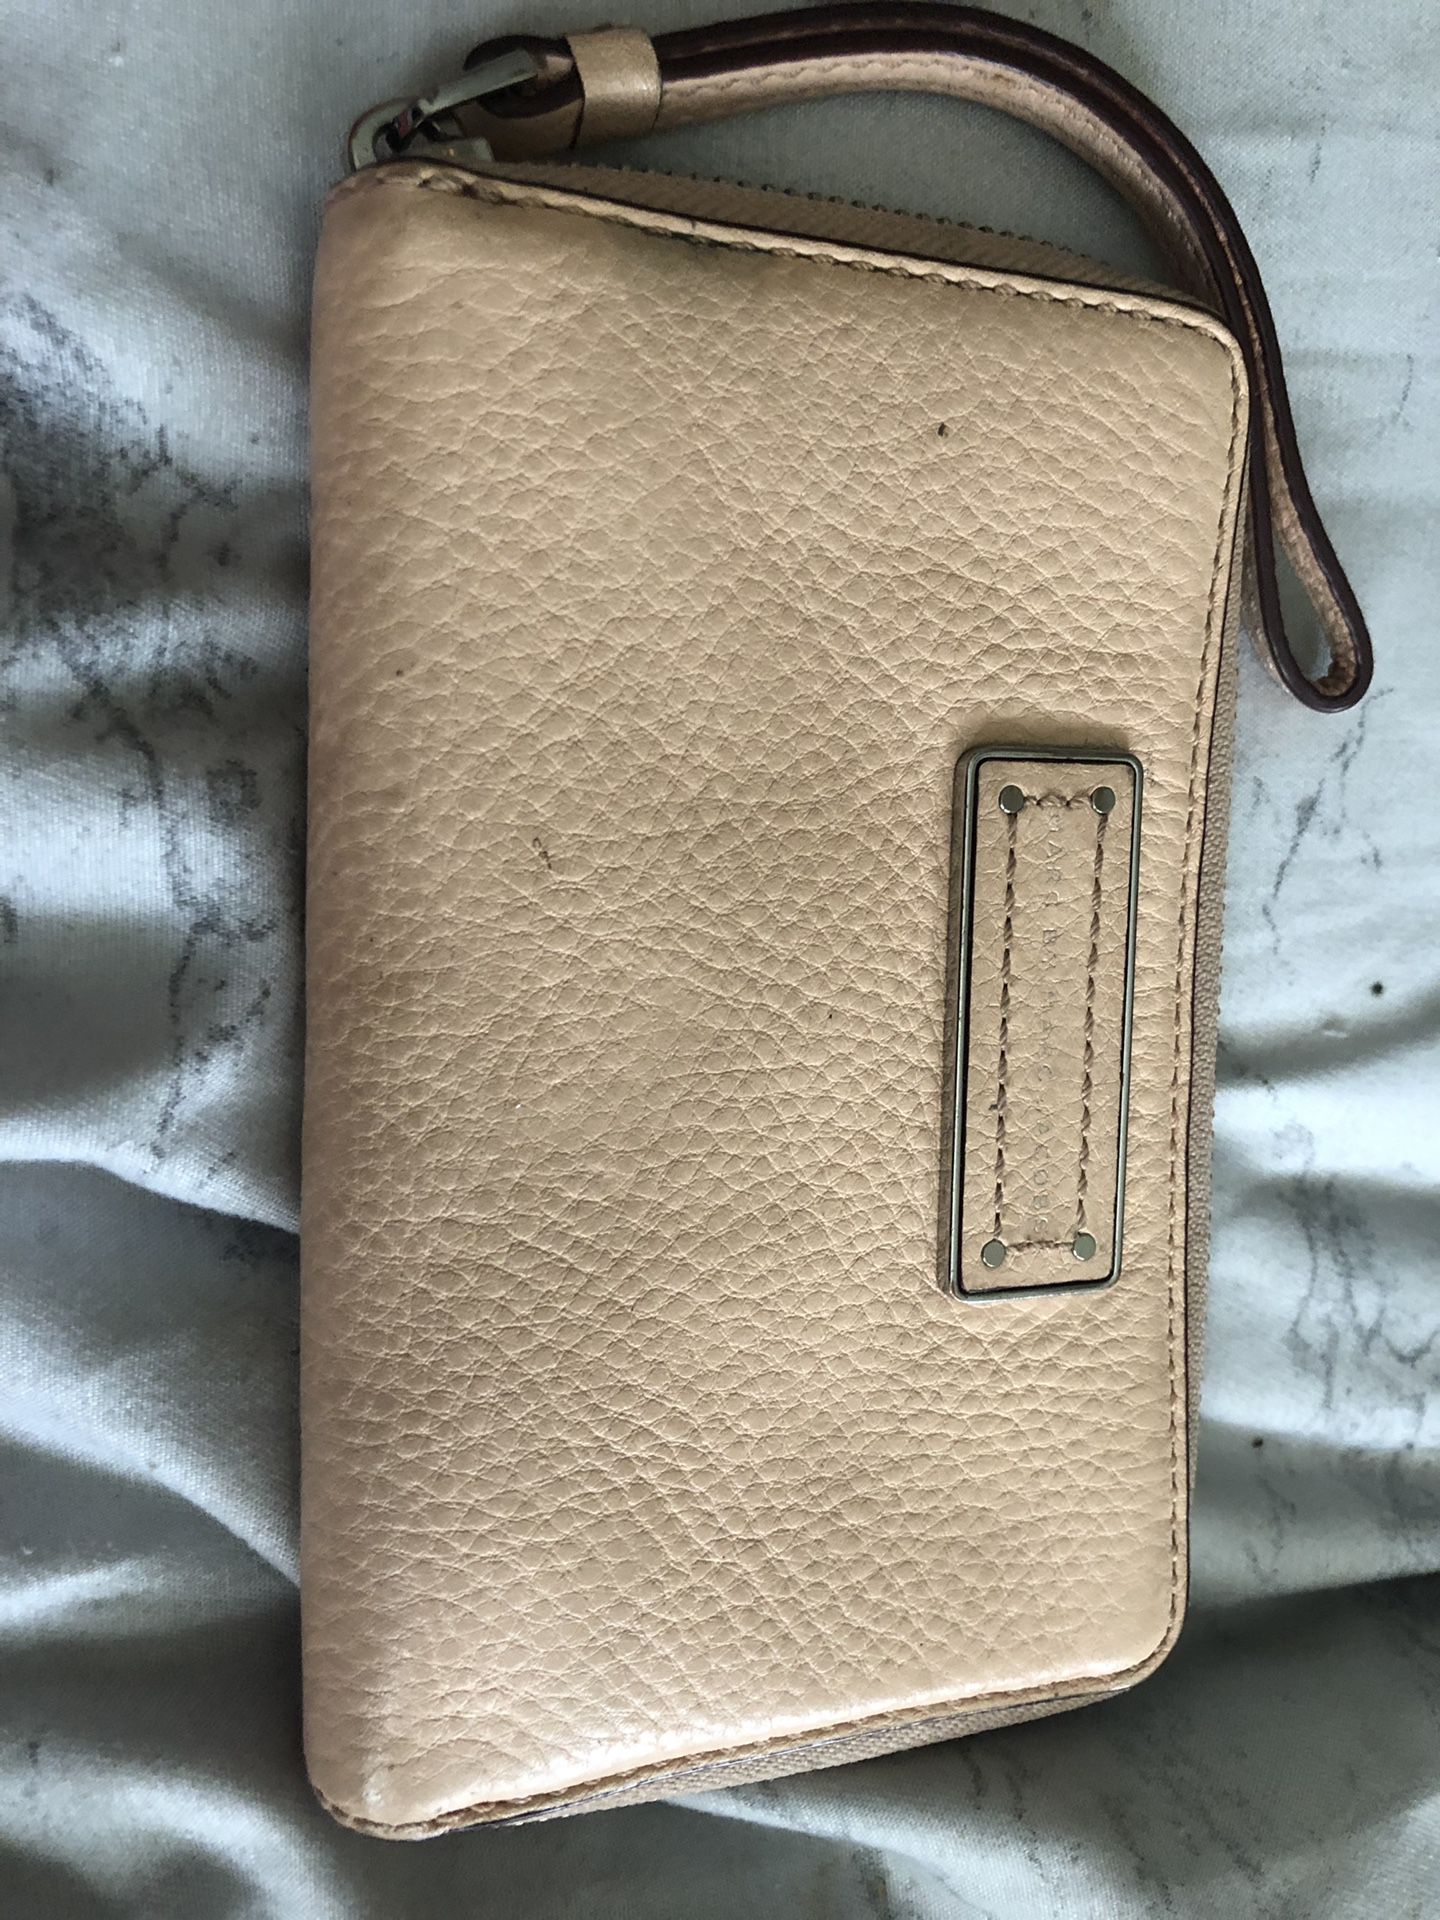 Marc by Marc Jacobs light pink wallet